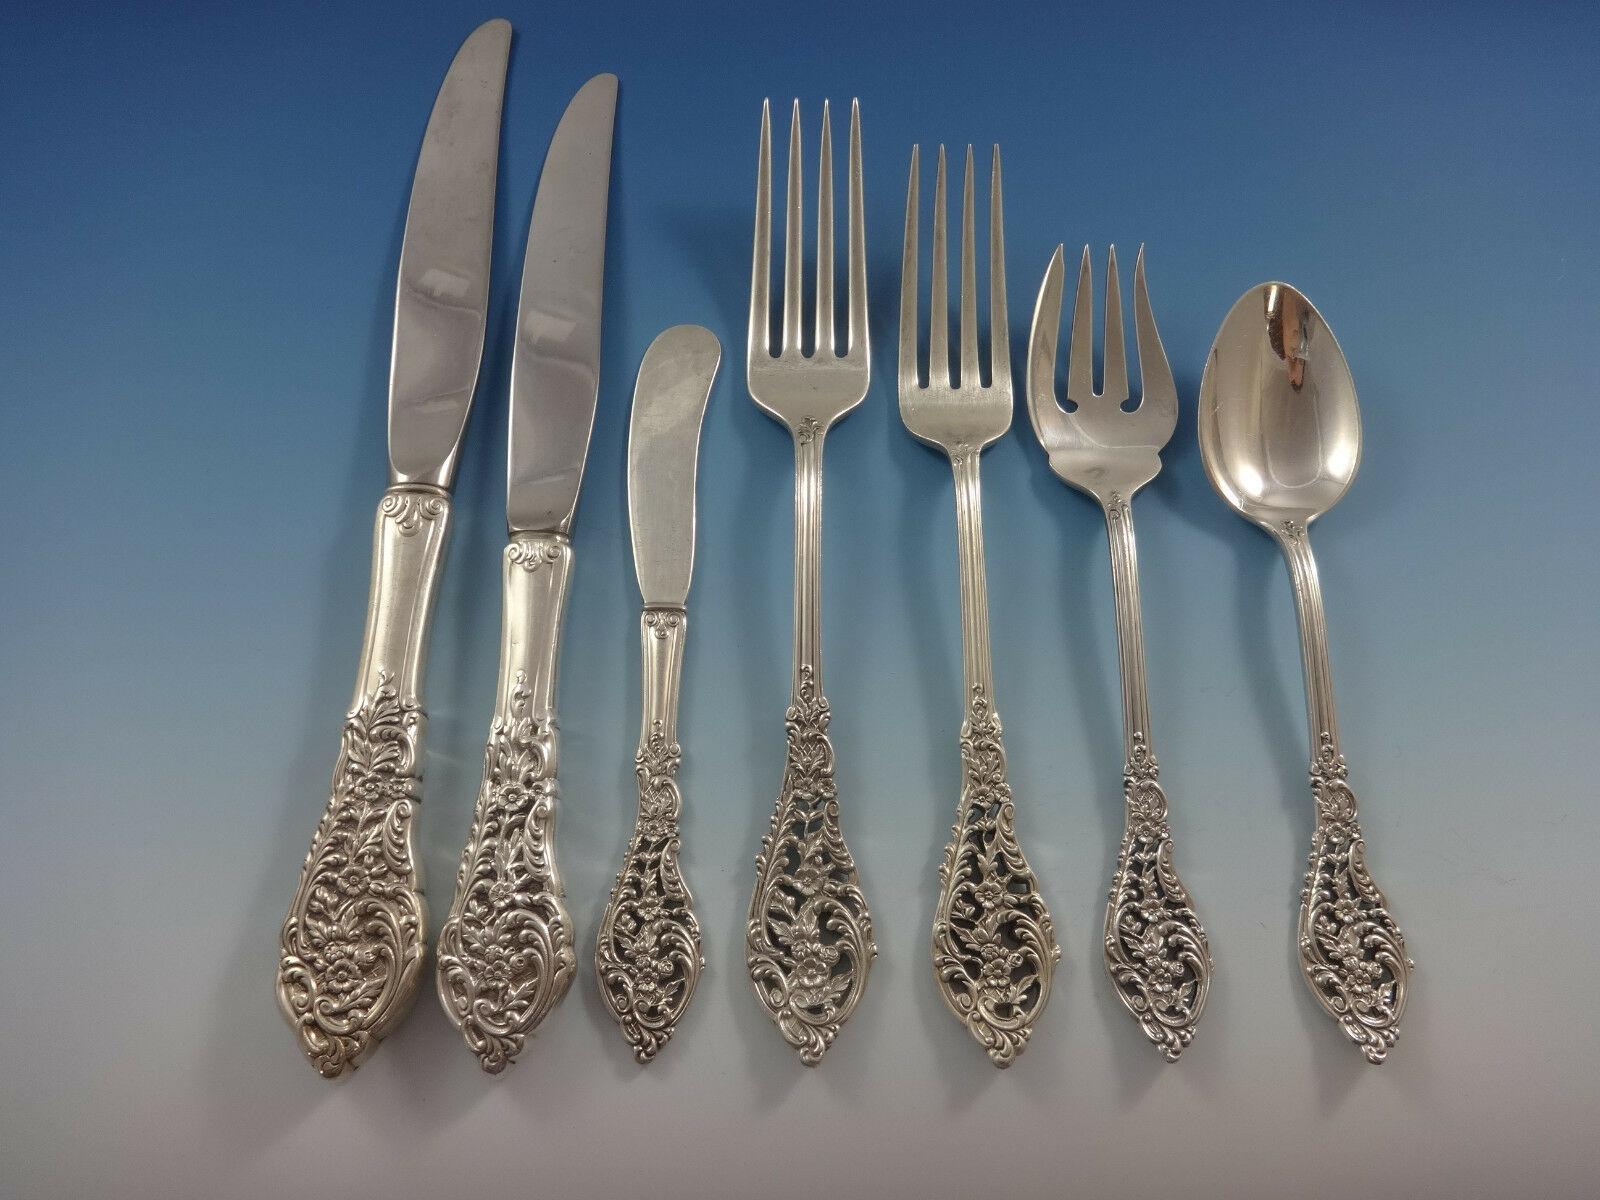 Beautiful Florentine Lace by Reed & Barton sterling silver dinner and luncheon size flatware set of 59 pieces. This set includes:

8 dinner size knives, 9 1/2